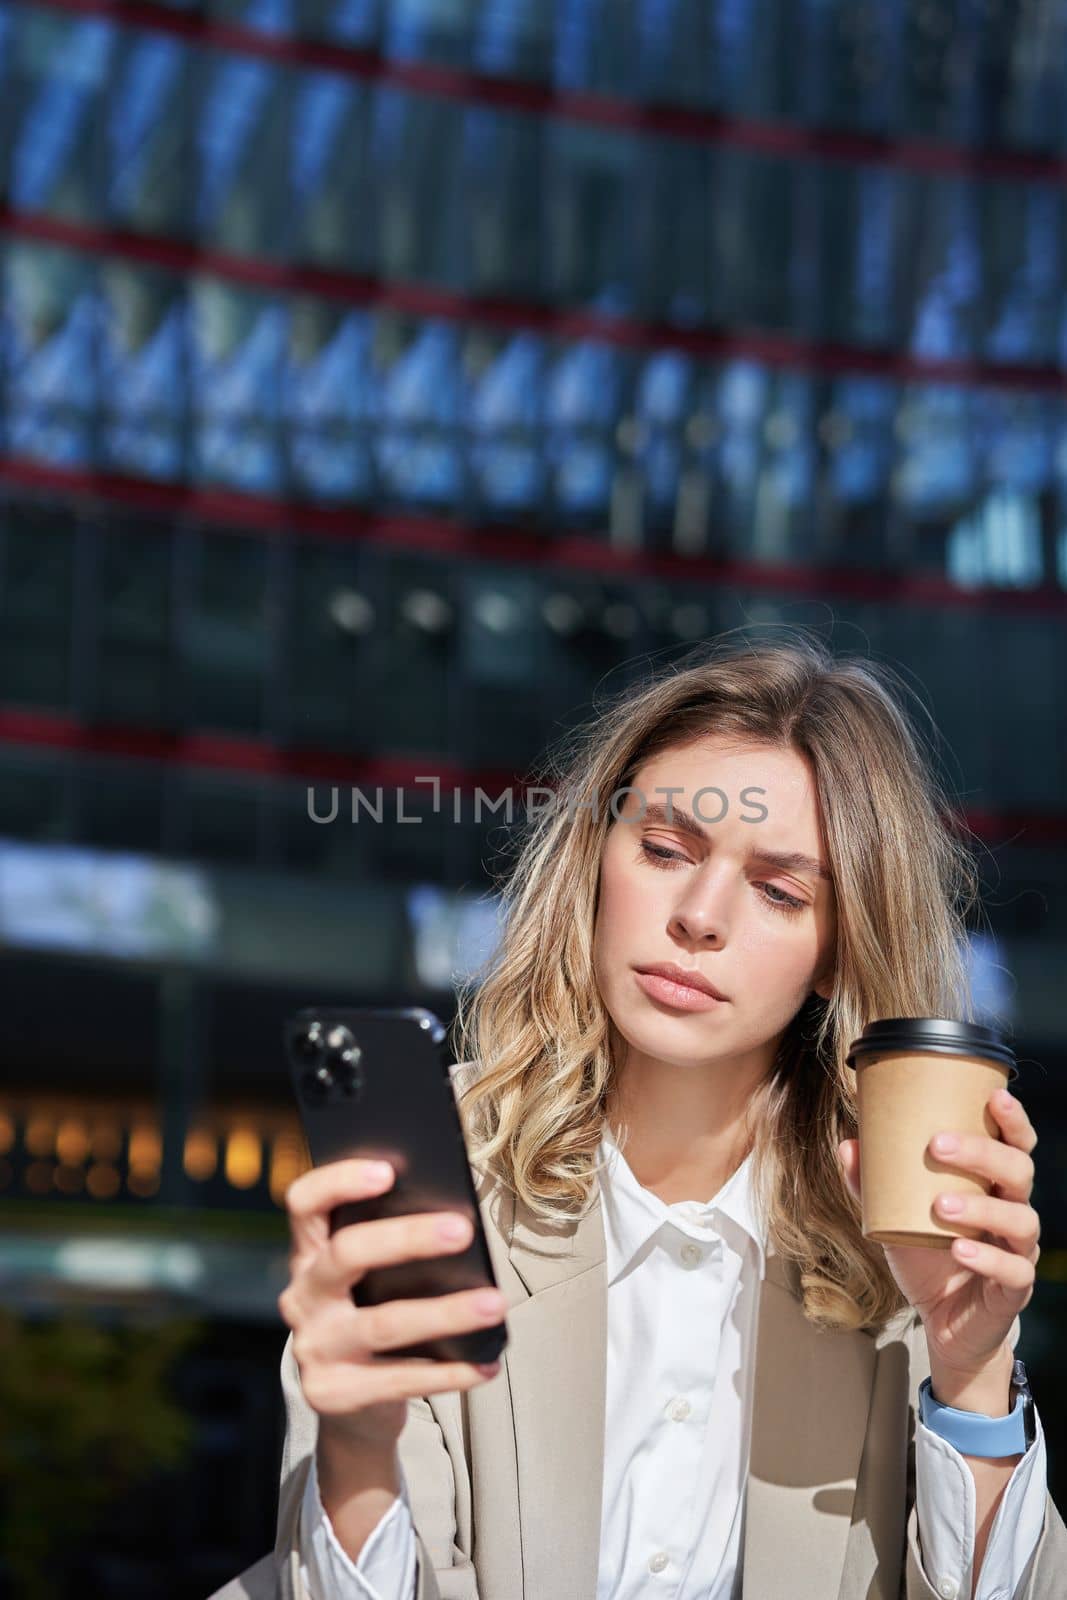 Vertical shot of young corporate woman drinks her coffee and looks at mobile phone, texts message, stands outside in city.